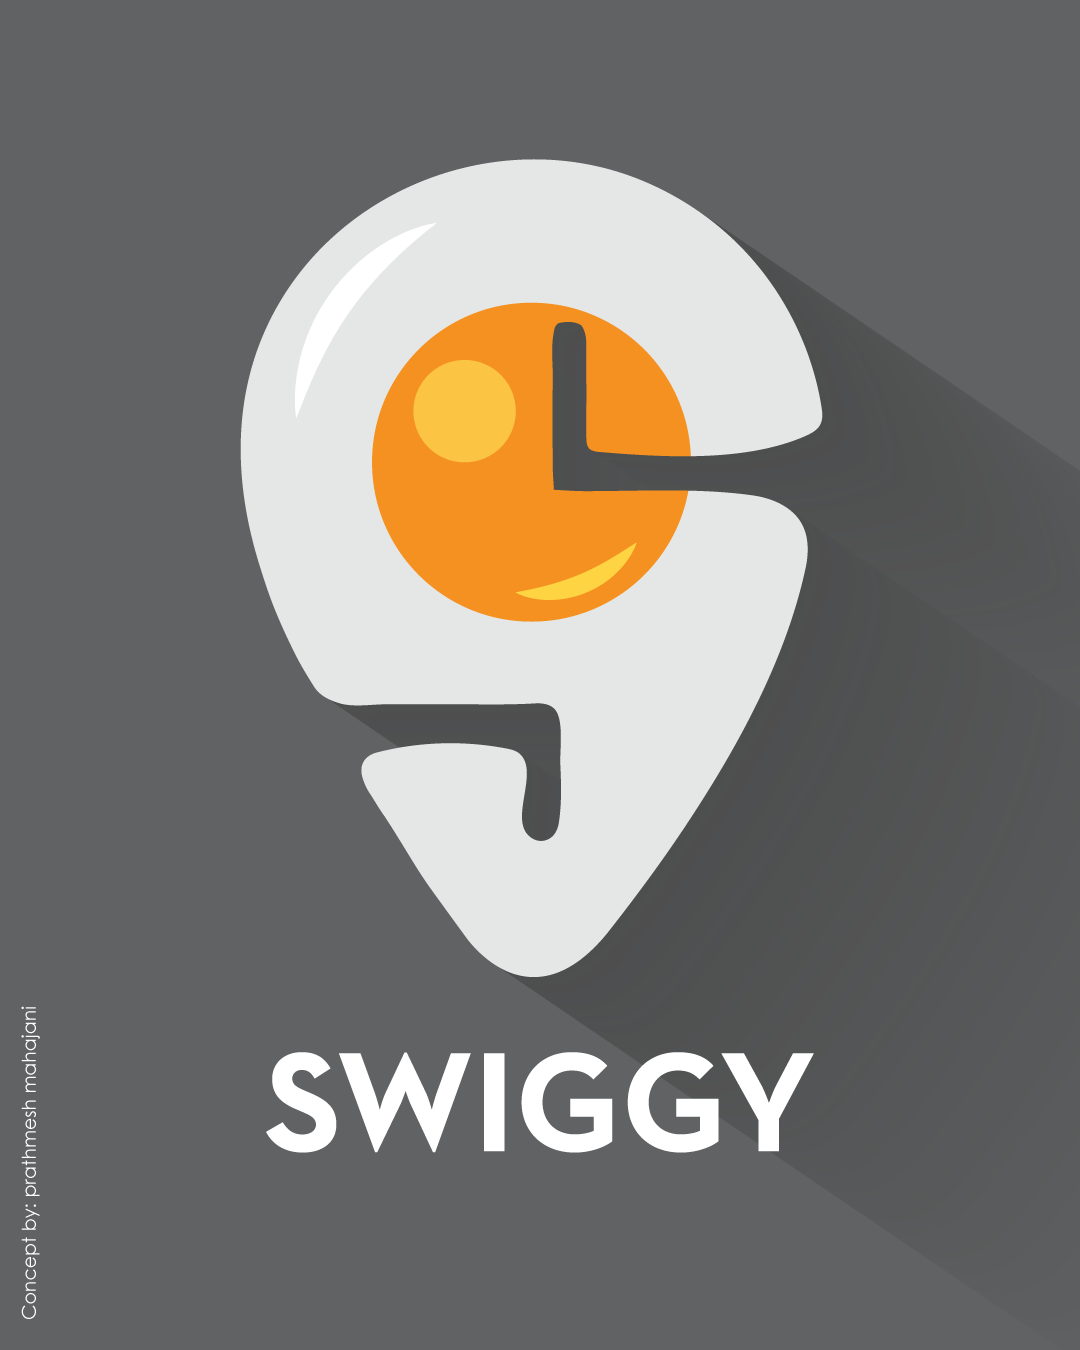 Redesigned concept for Swiggy's Specific Orders